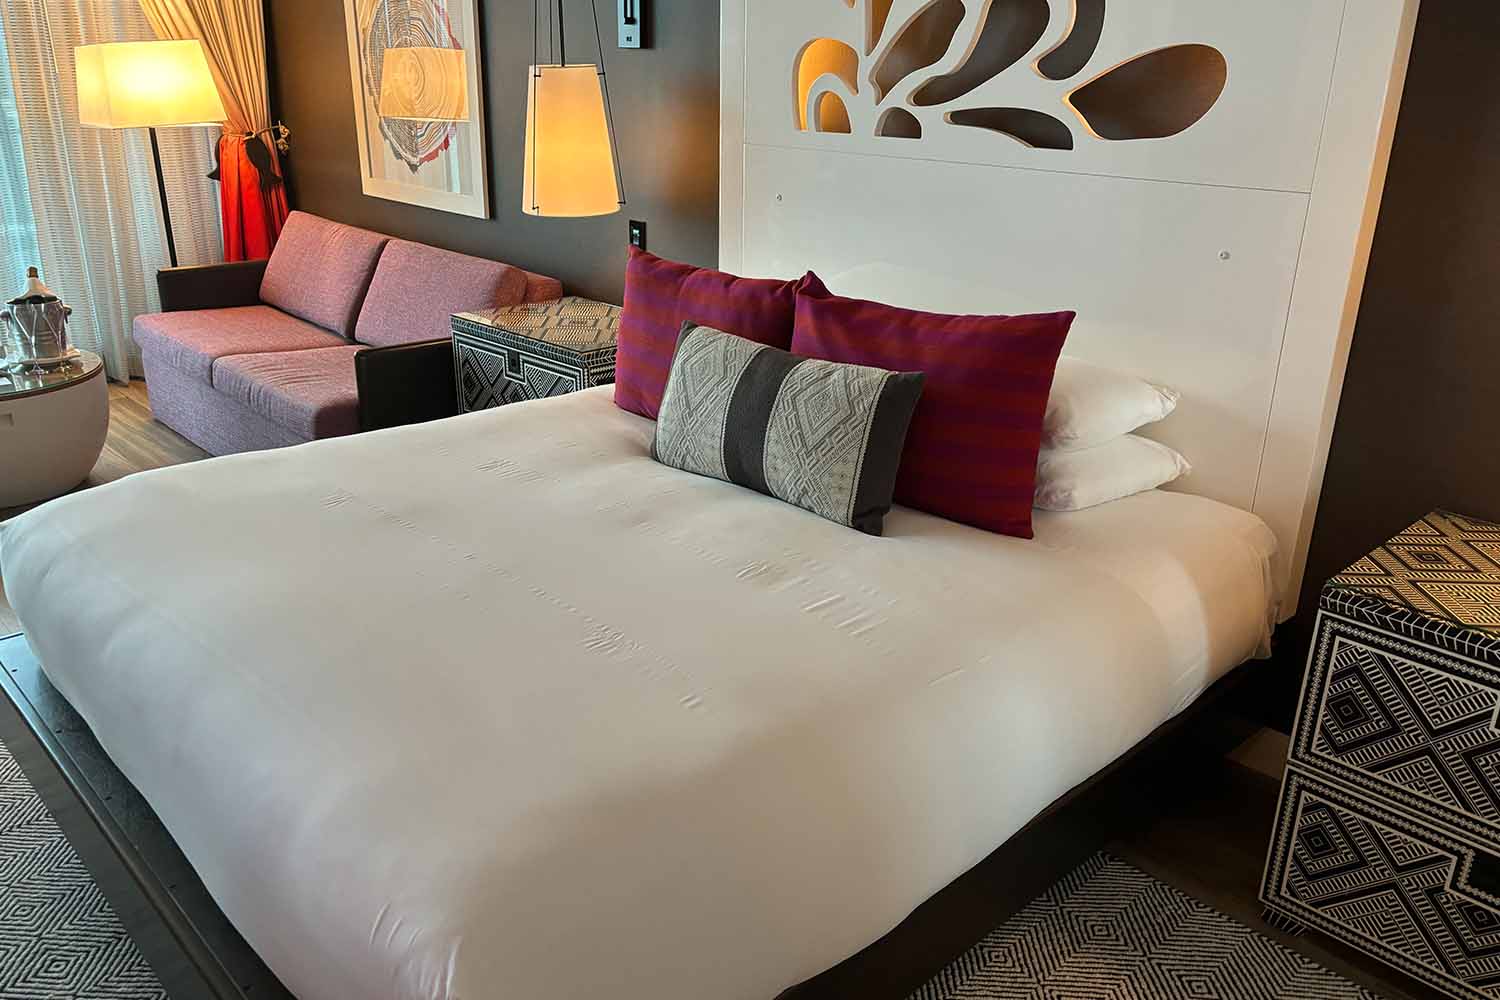 A king-size bed in a room at the Kimpton Seafire Resort